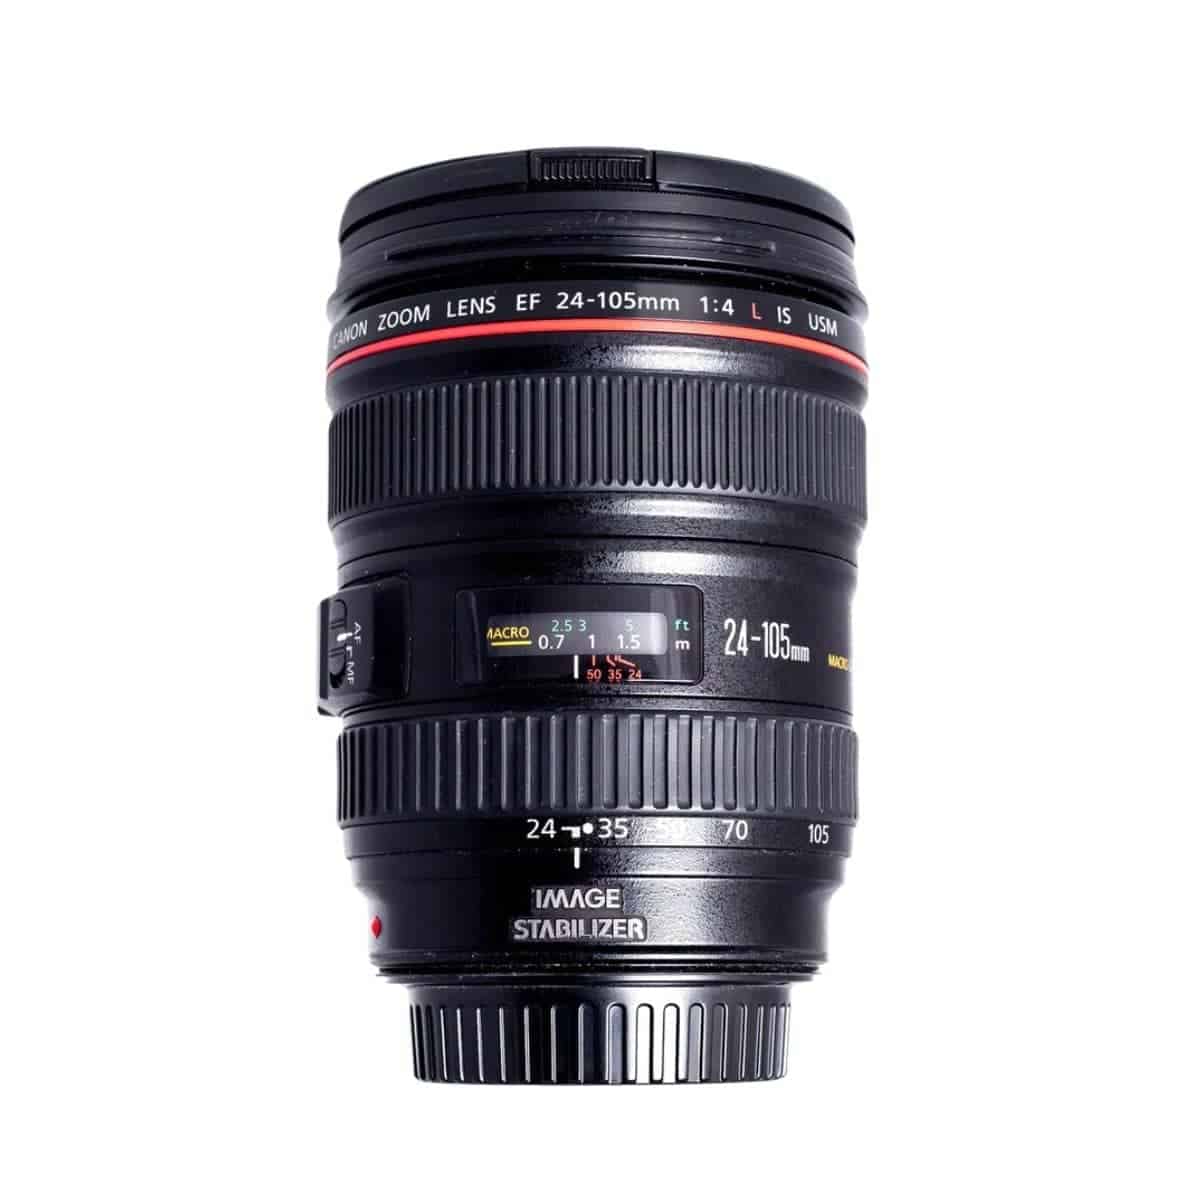 Canon 24mm to 105mm USM zoom lens.